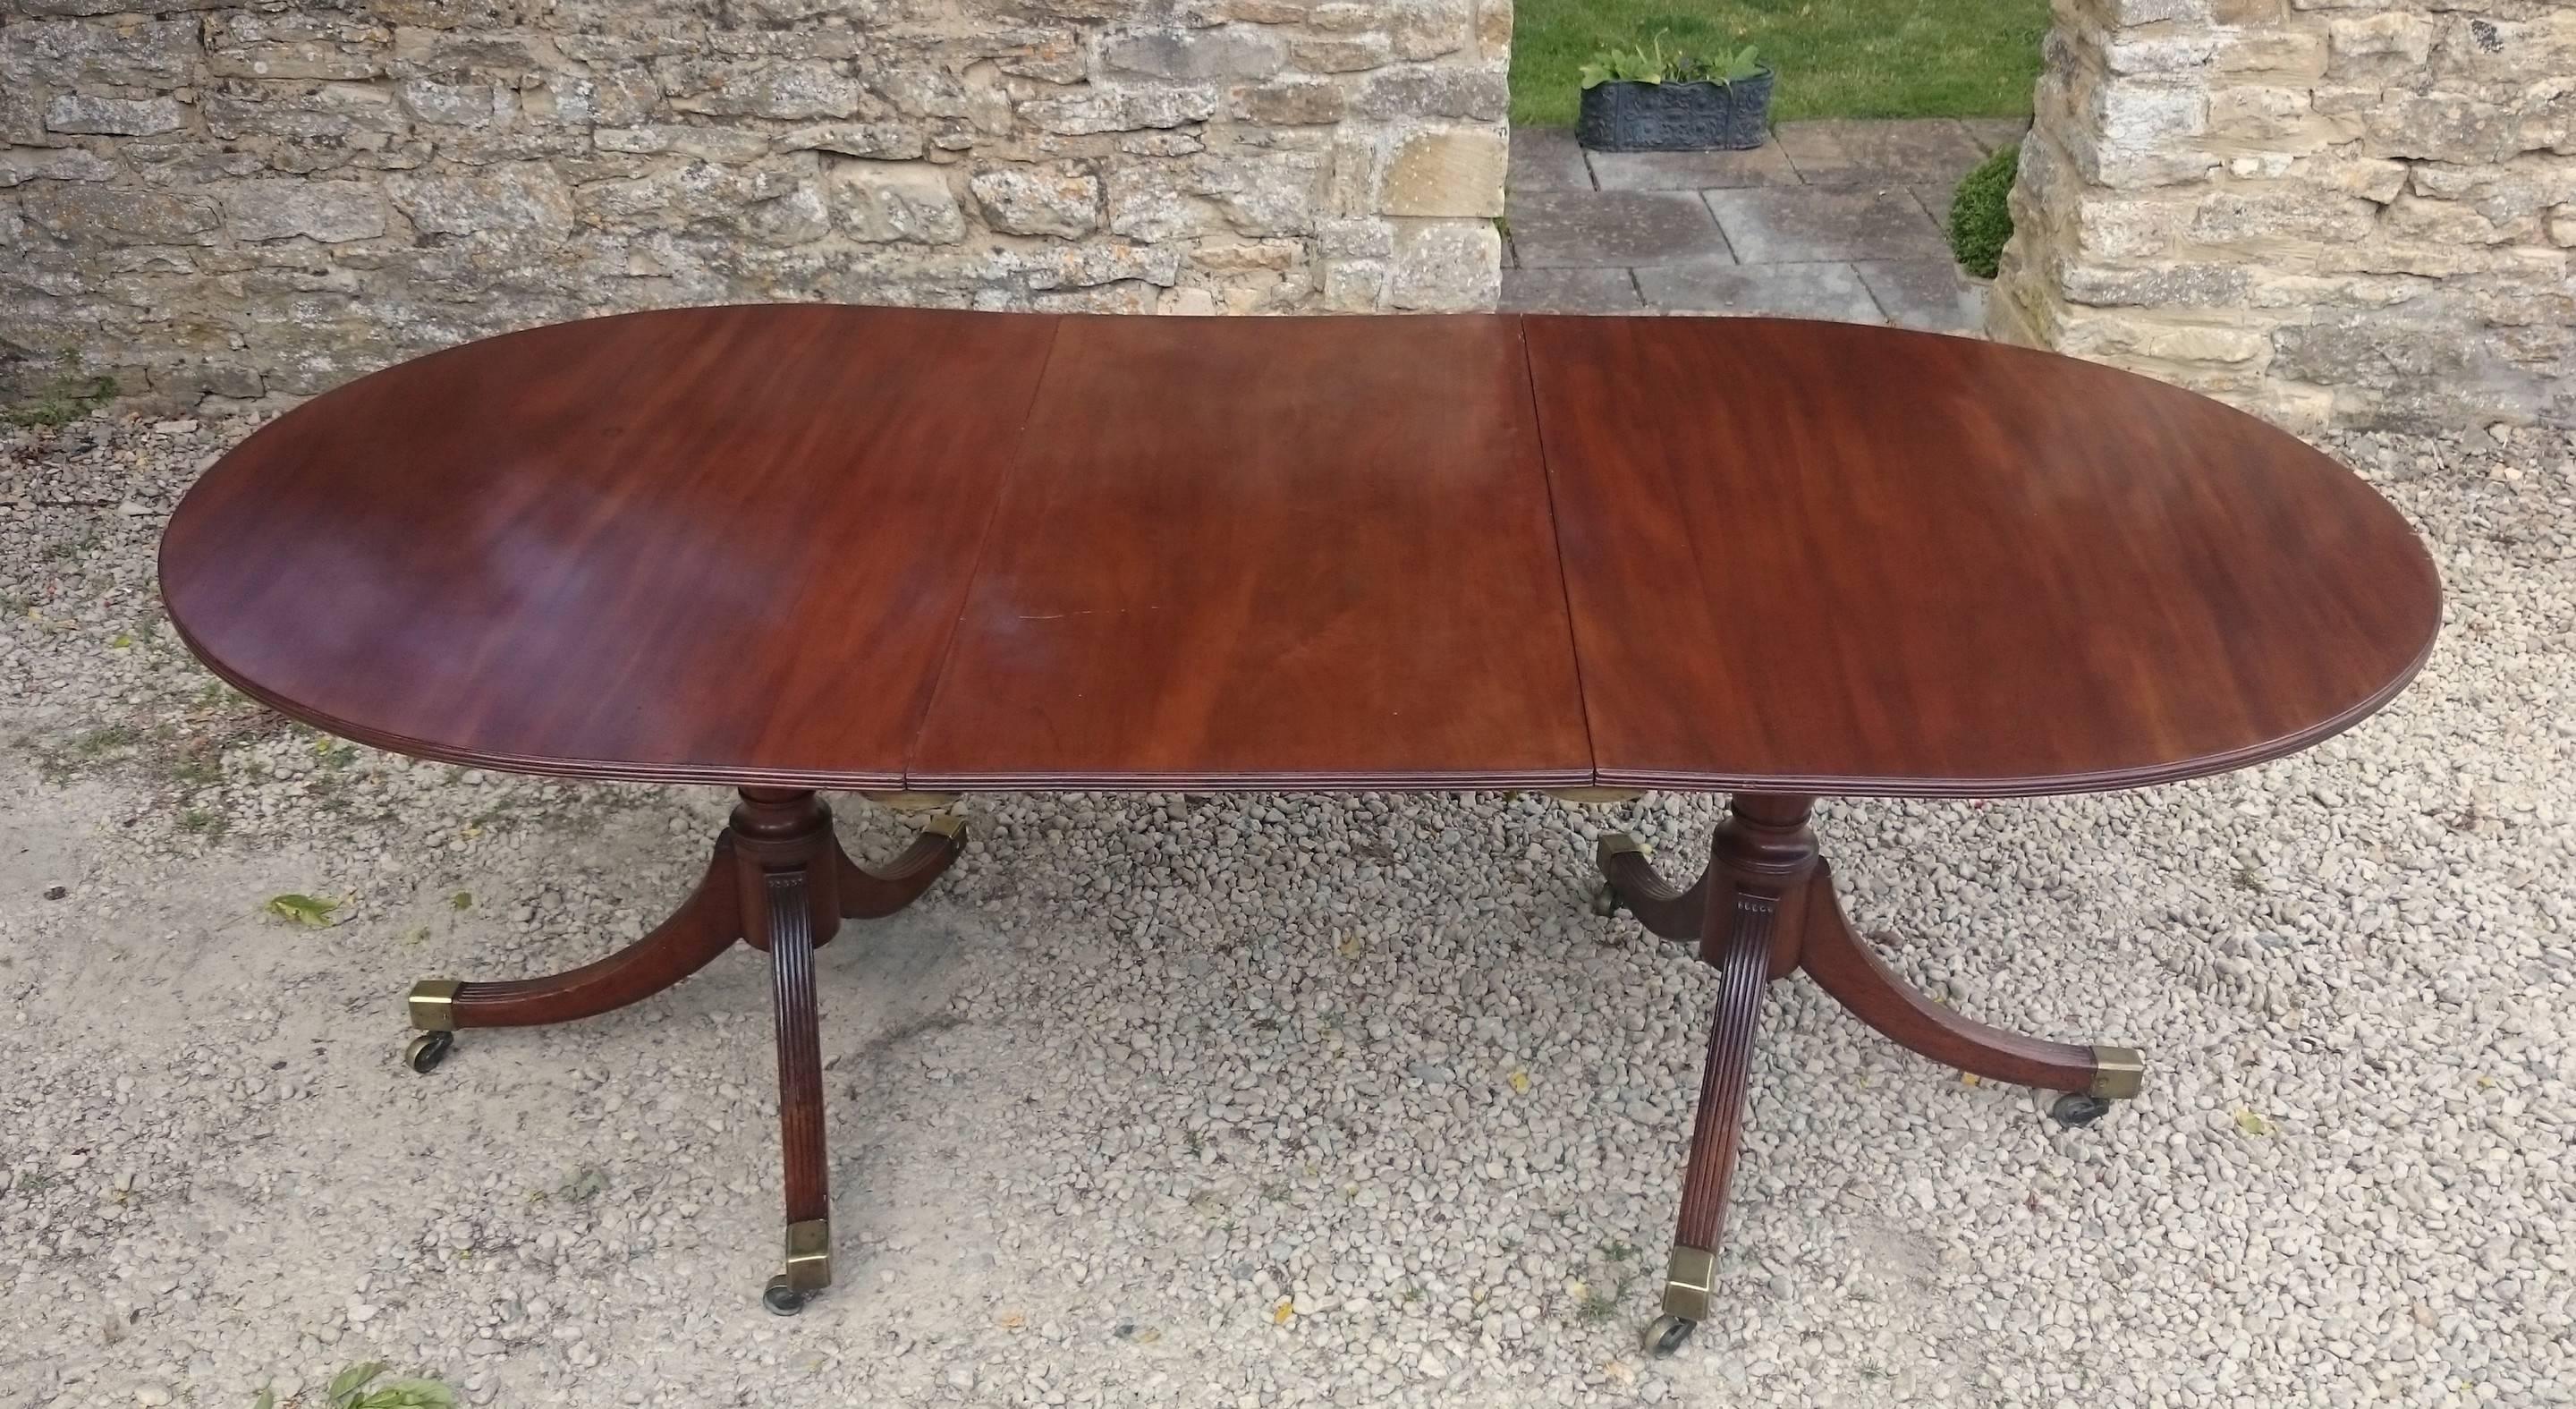 Antique George III revival twin pedestal dining table standing on outstretched three splay bases. This table has no frieze and so there is plenty of room for knees. Judging by the timber and the construction, the pedestals look as if they may be